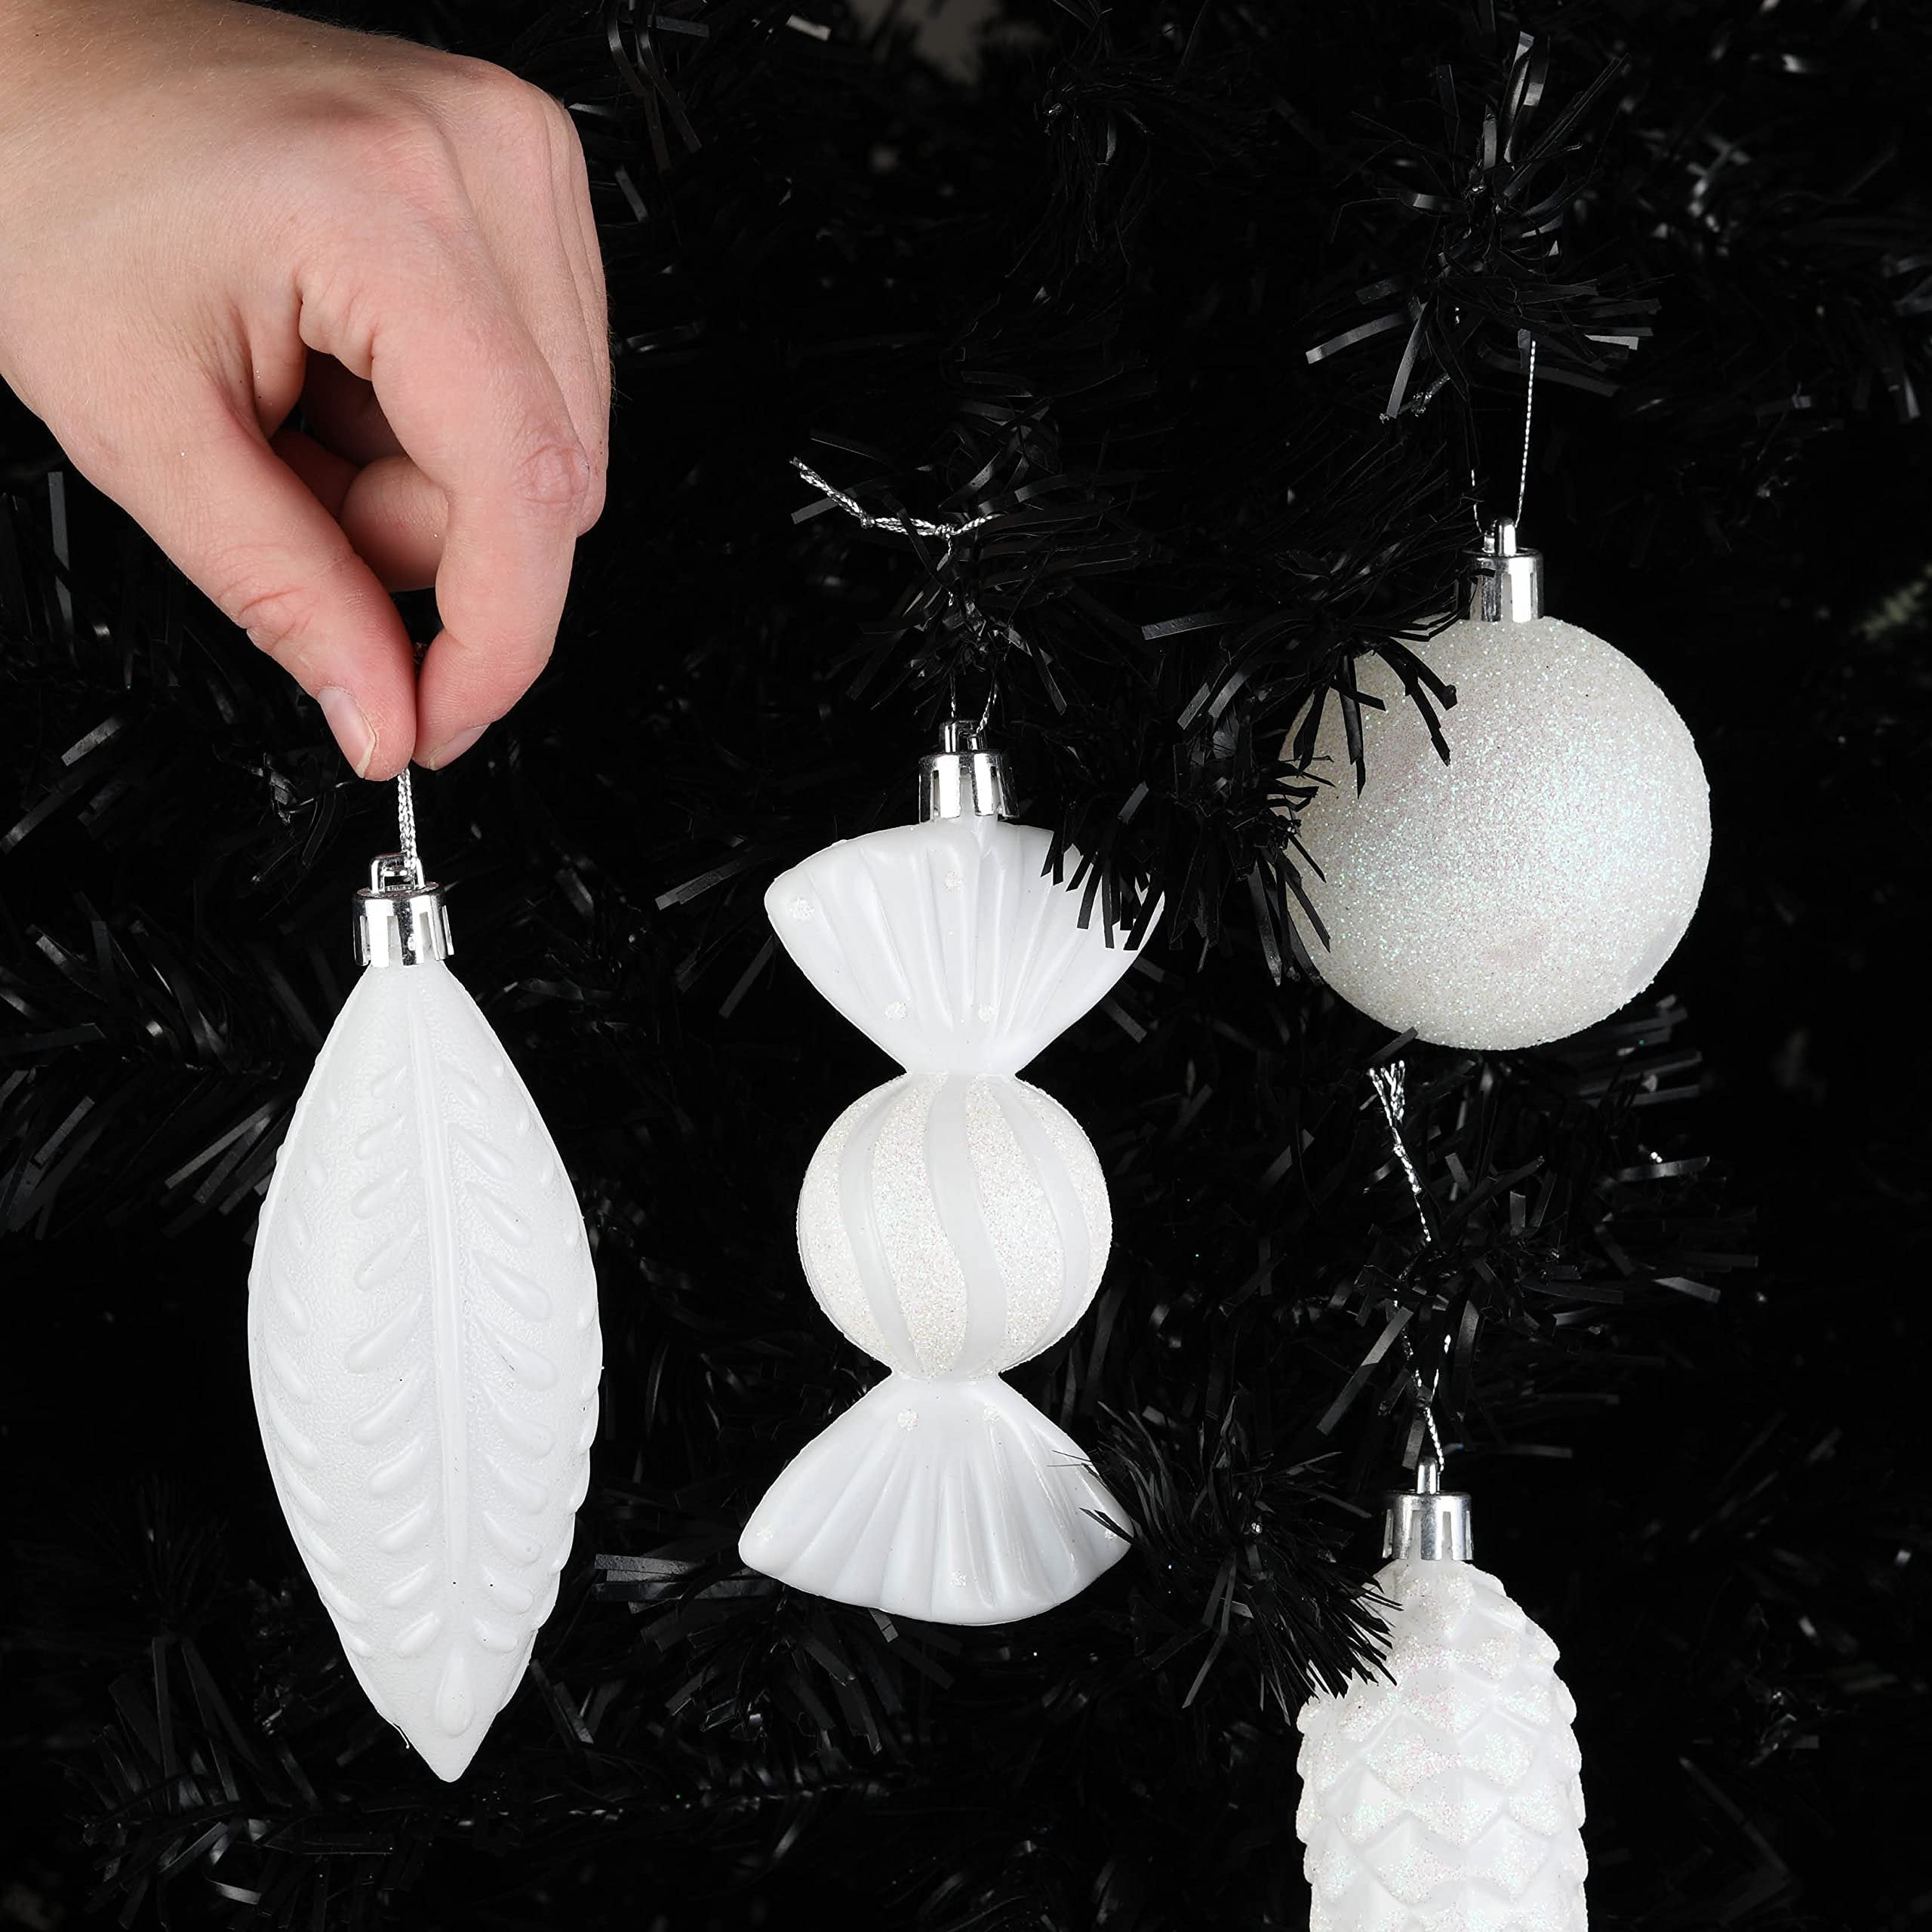 Prextex White Ornaments for Christmas Tree Decorations - Christmas Ball Ornaments - 24 pcs Shatterproof Ornaments with Hanging Loop for Holiday, Wreath & Party Decorations - White Christmas Ornaments